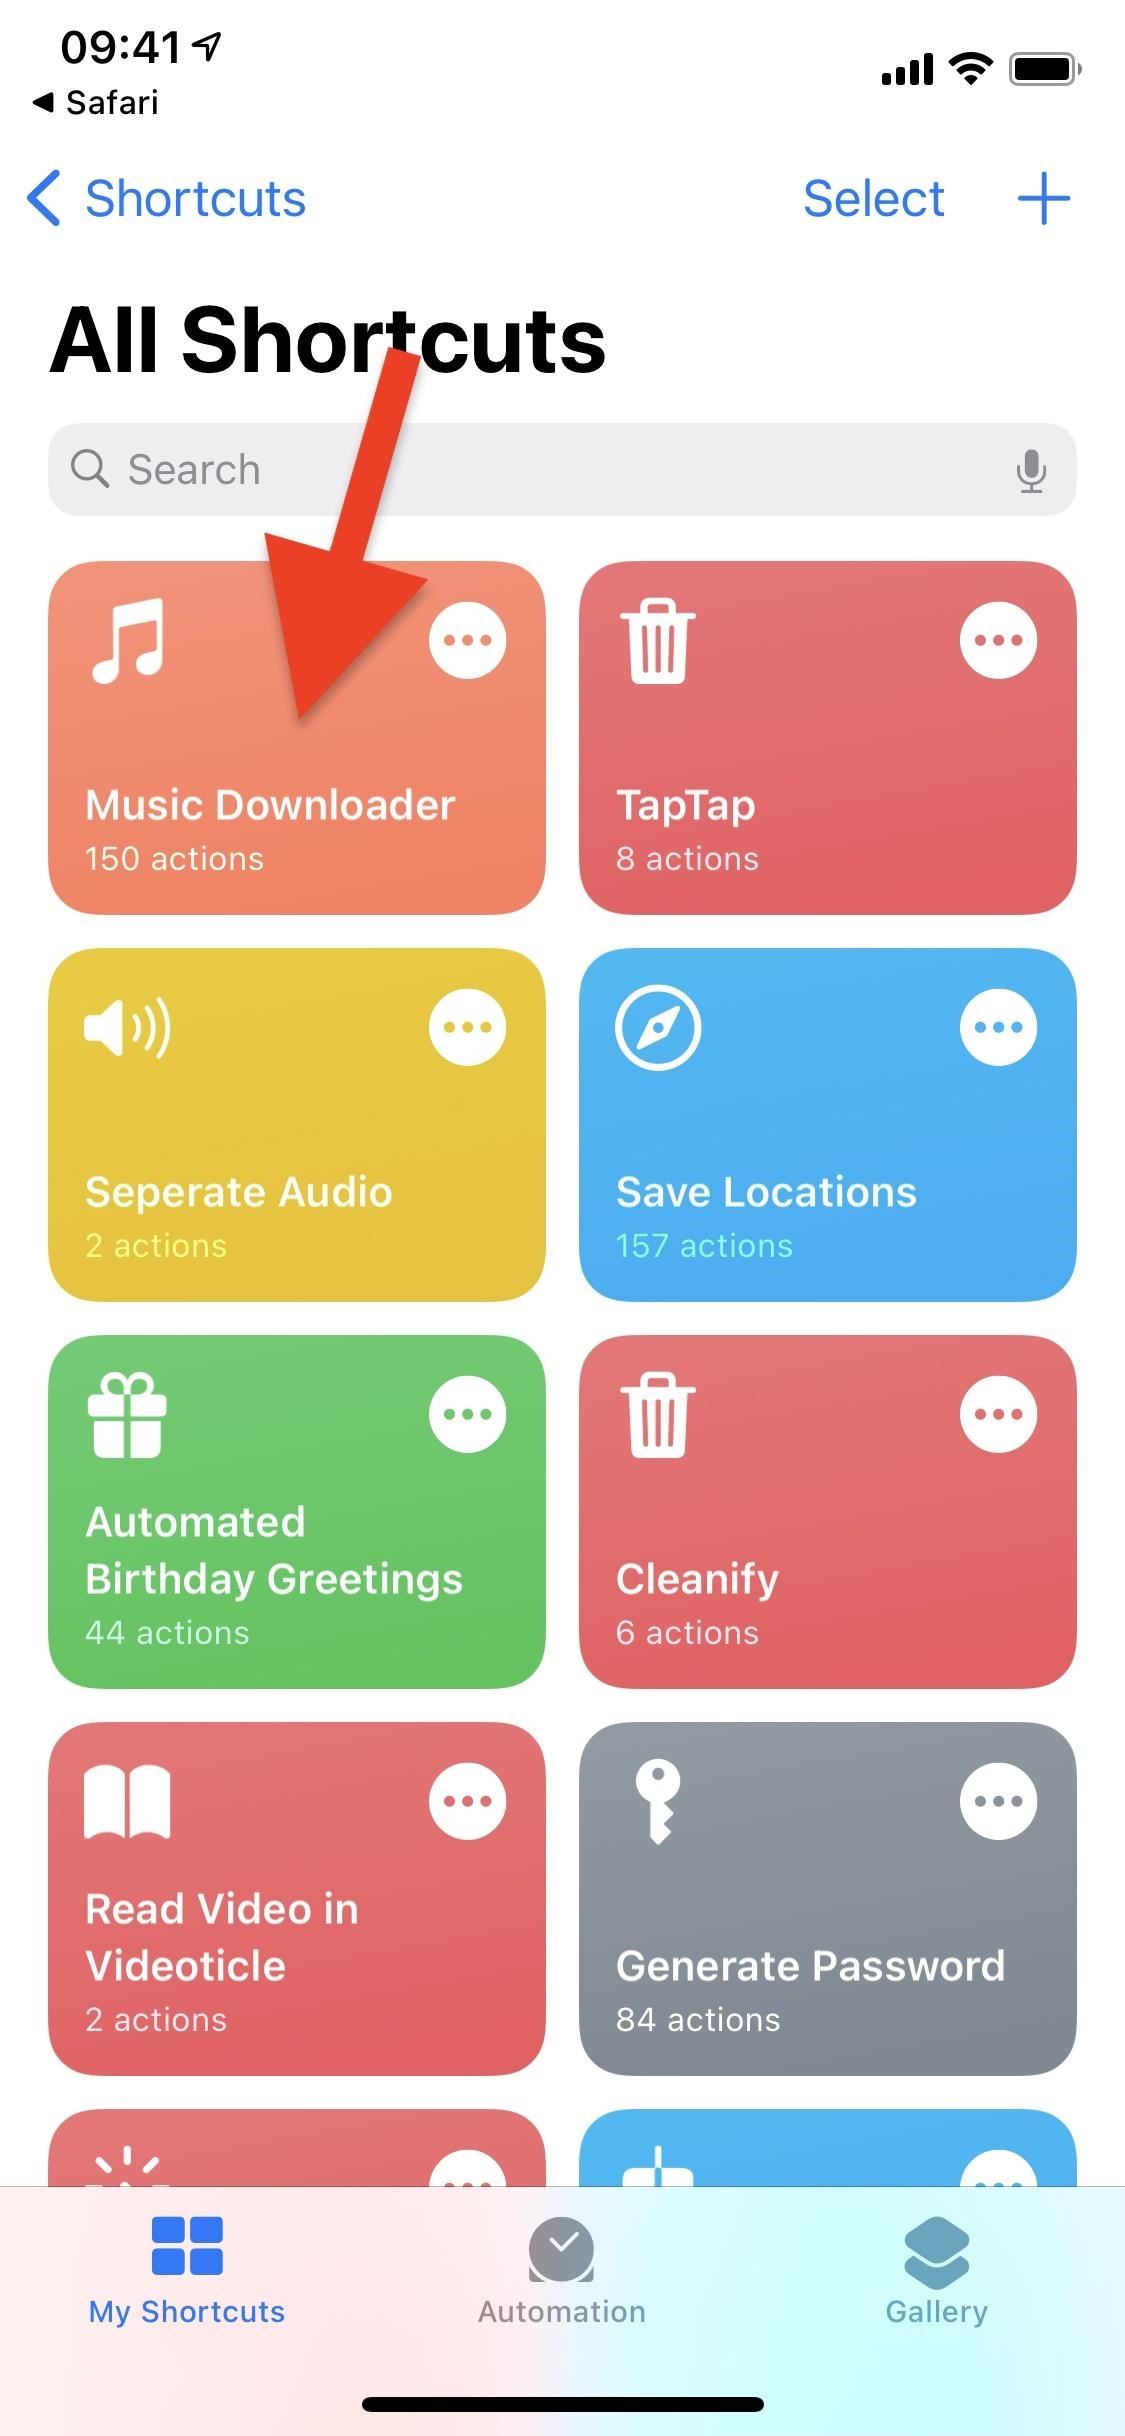 This iOS Shortcut Finds and Downloads Free Songs for You to Listen to Offline on Your iPhone